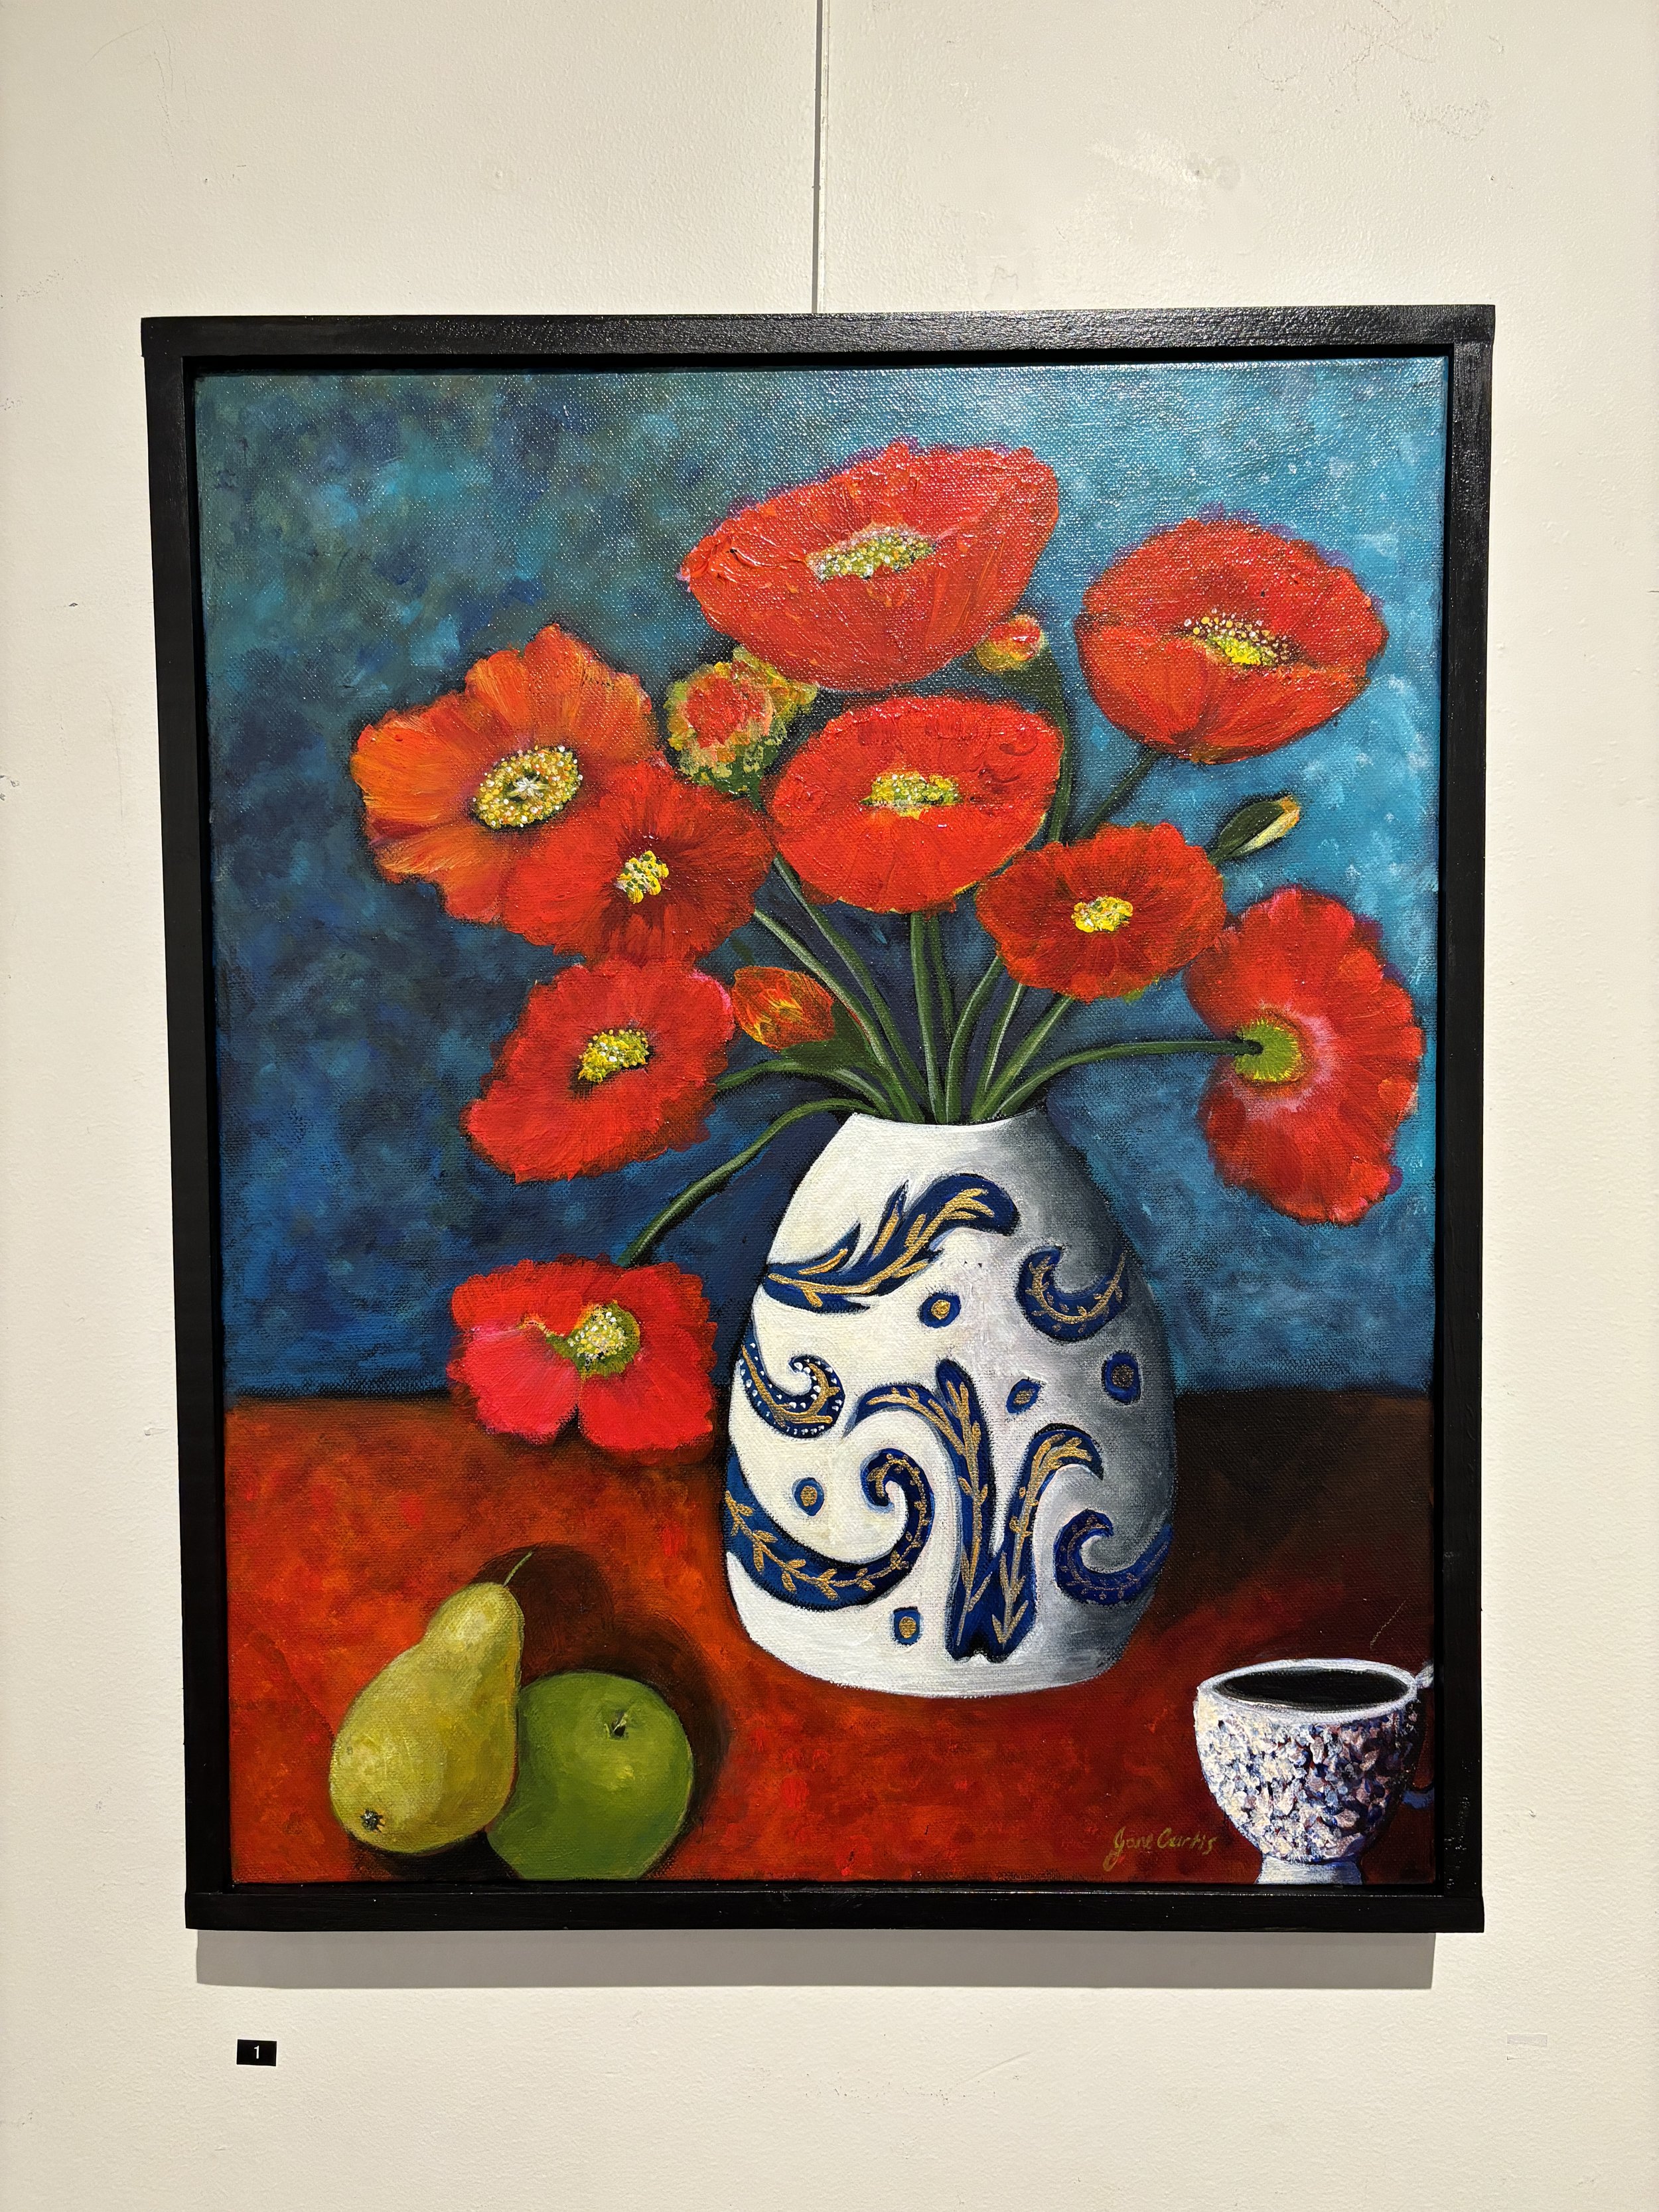 01. My Grannie's Vase and Poppies | $450 SOLD